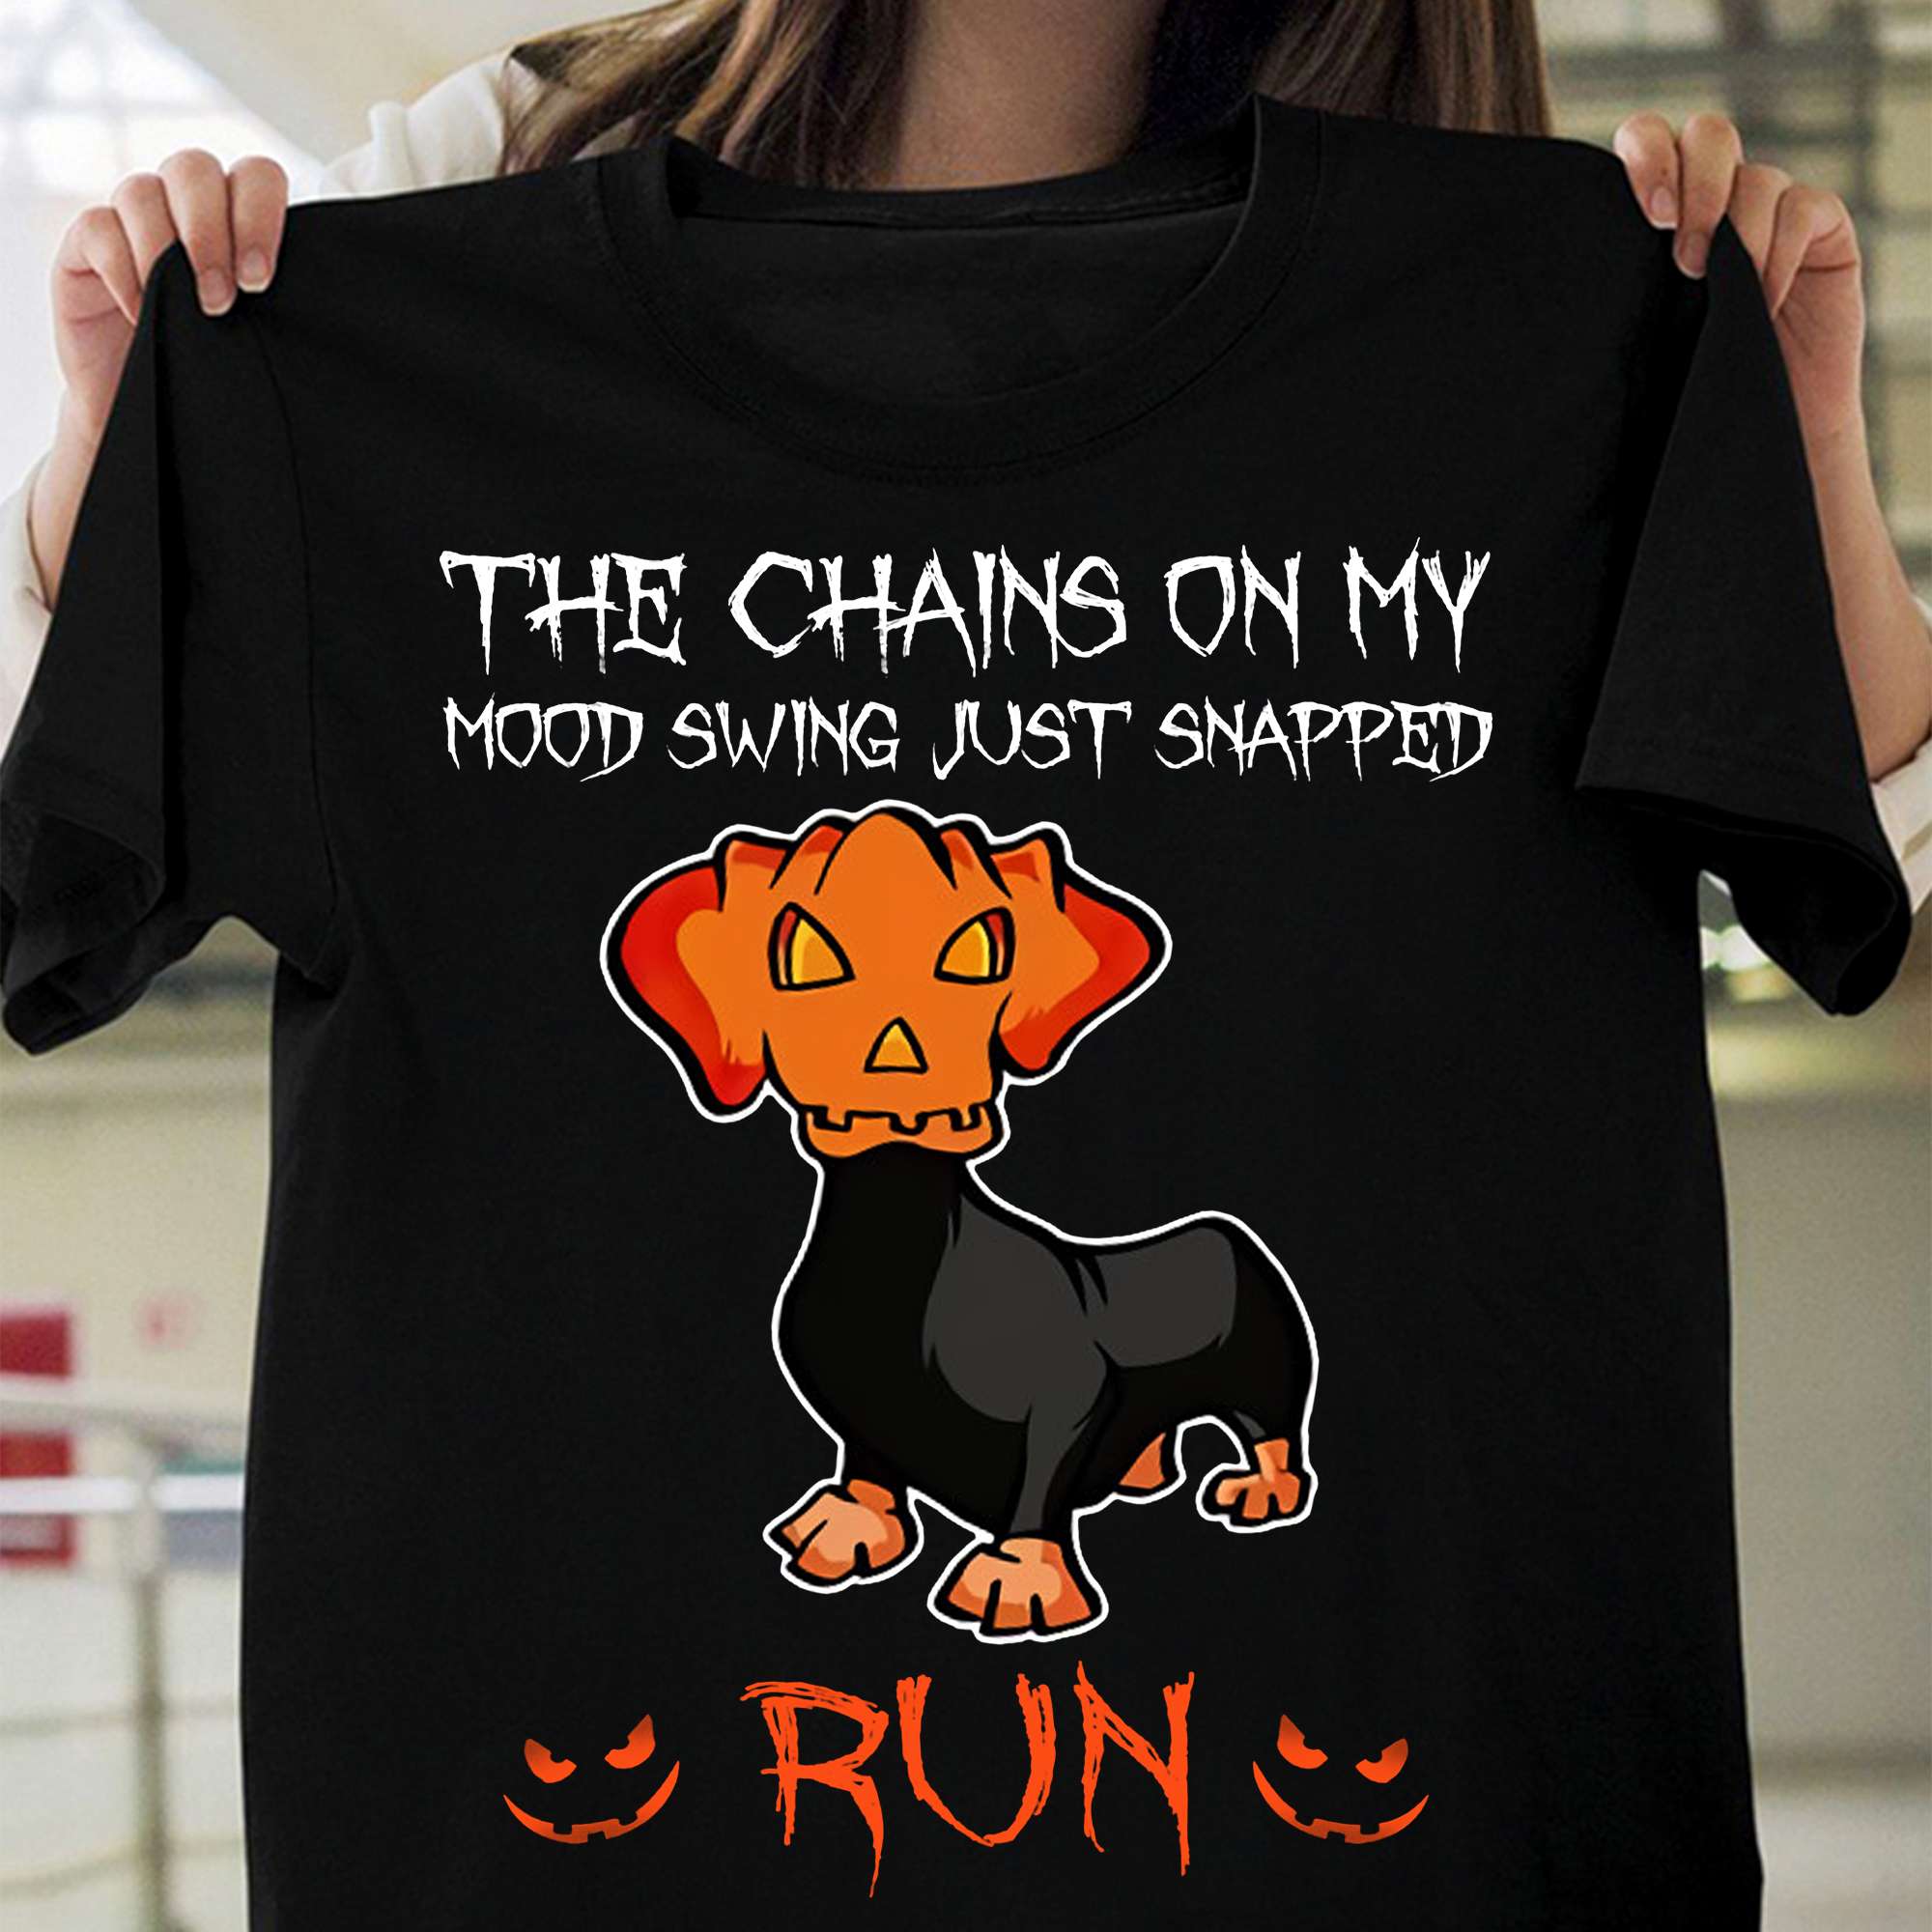 The chains on my mood swing just snapped run - Halloween Dachshund costume, Dachshund with skull pumpkin head